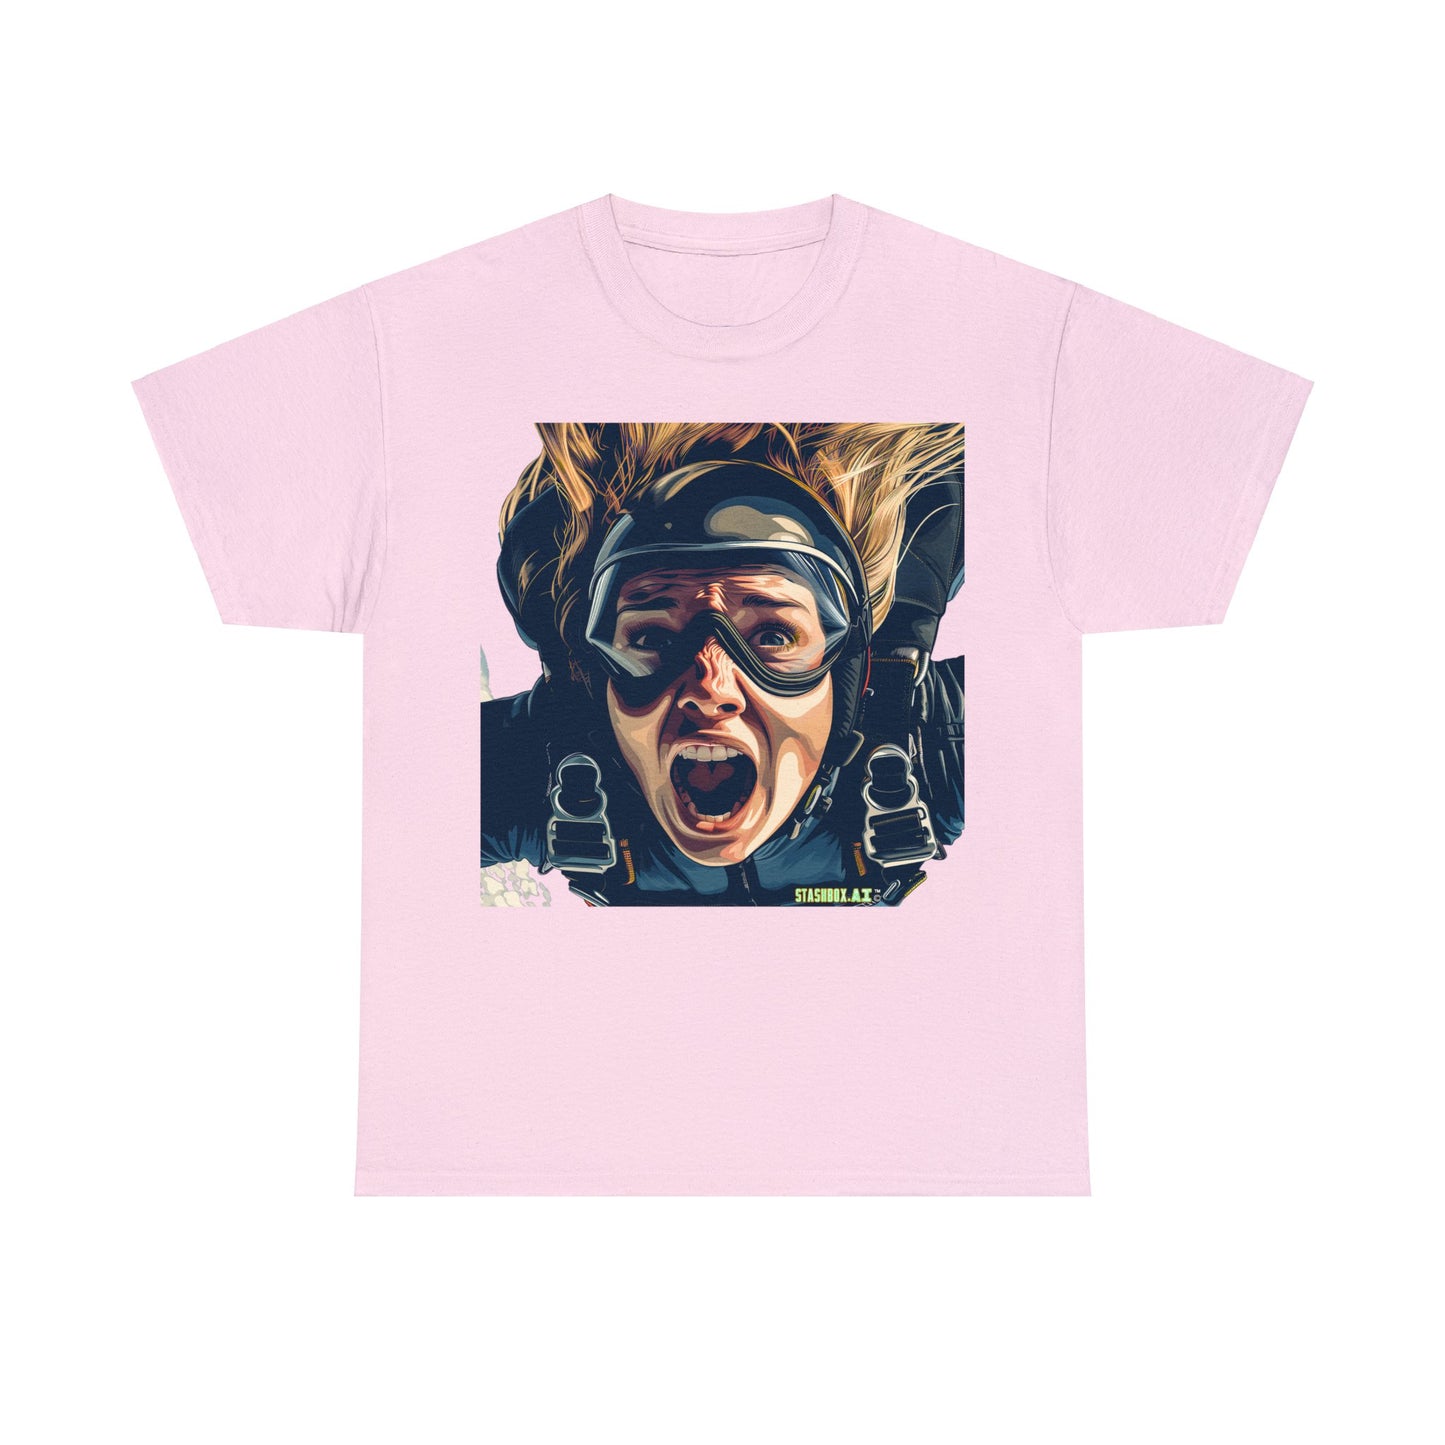 Unisex Adult Size Heavy Cotton Tshirt Beautiful Girl Mid-Skydiving terrified face - 023